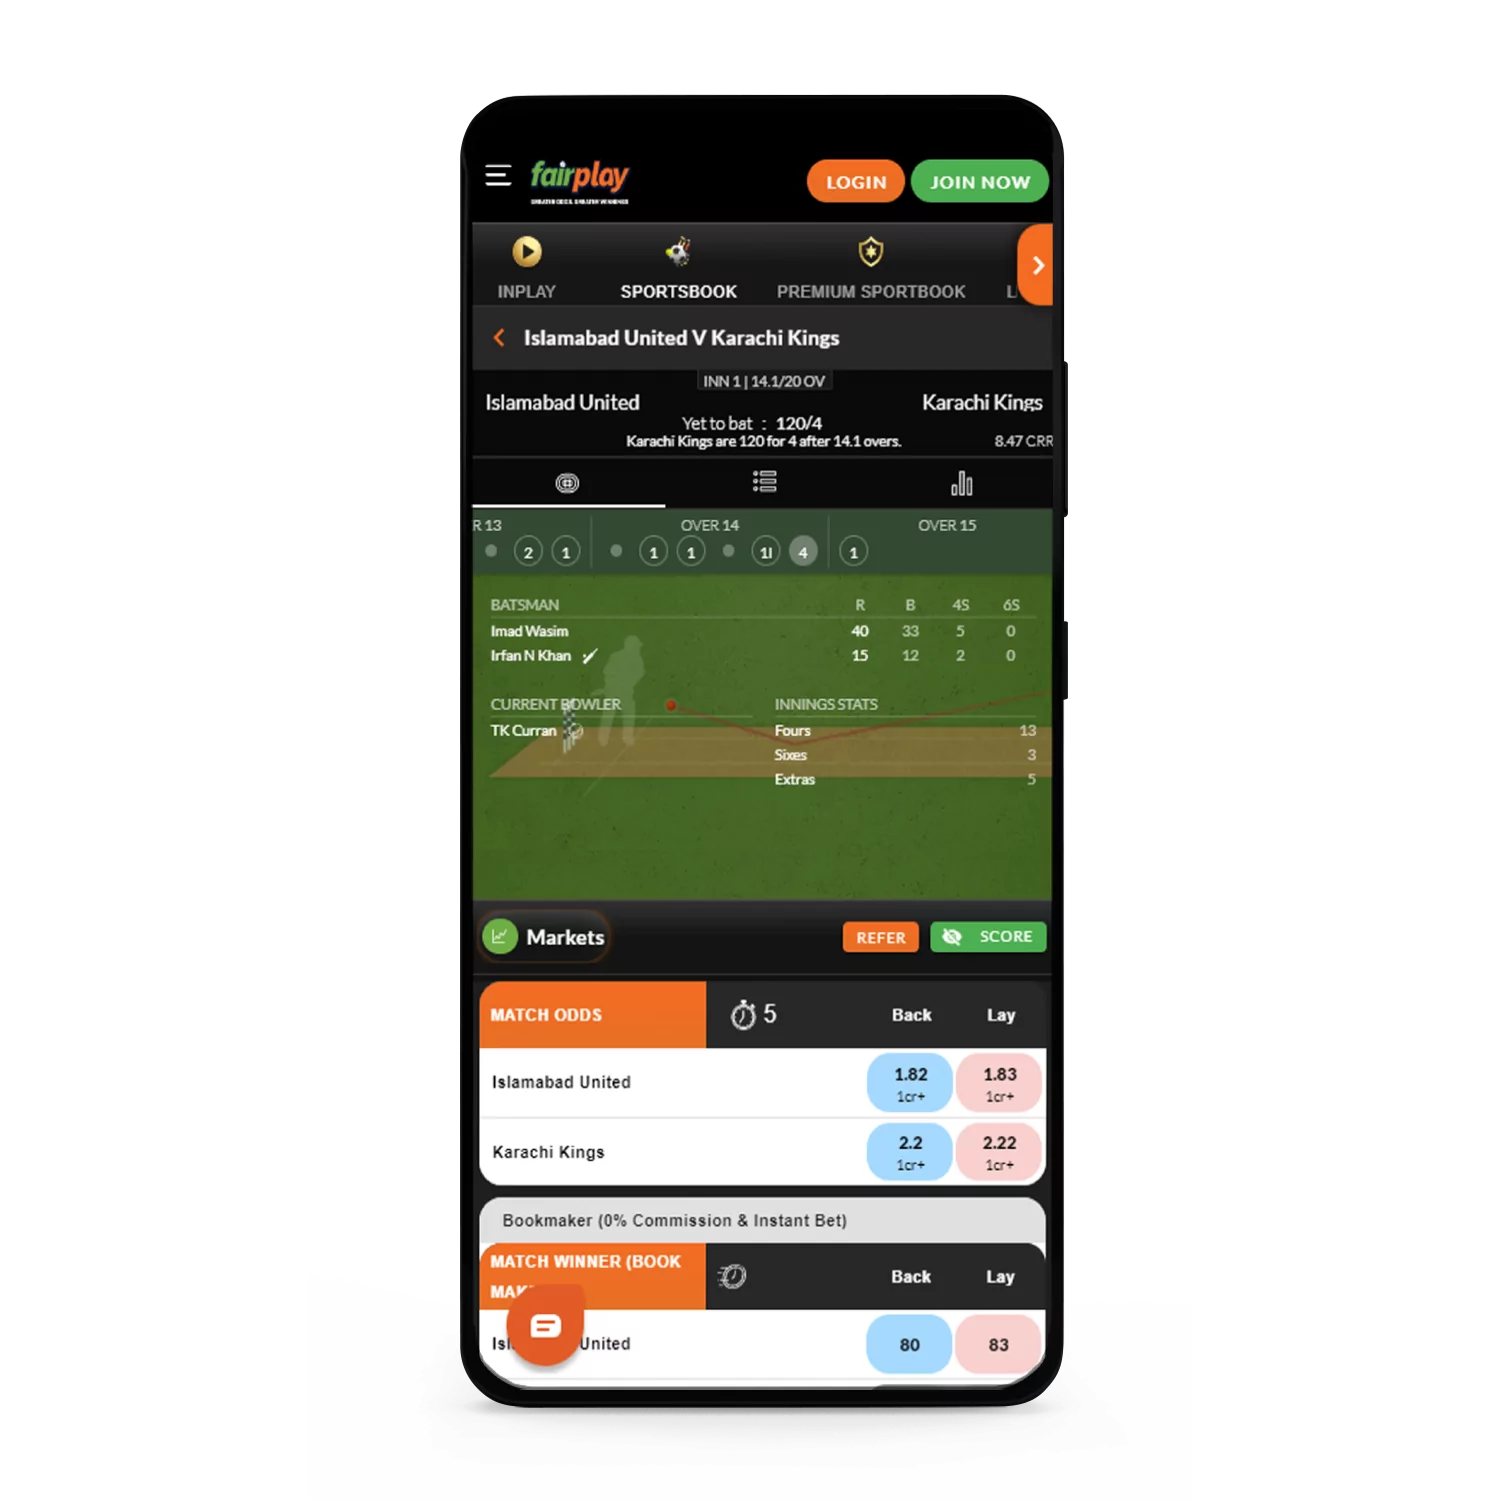 You can place bets on live cricket events in the Fairplay app.